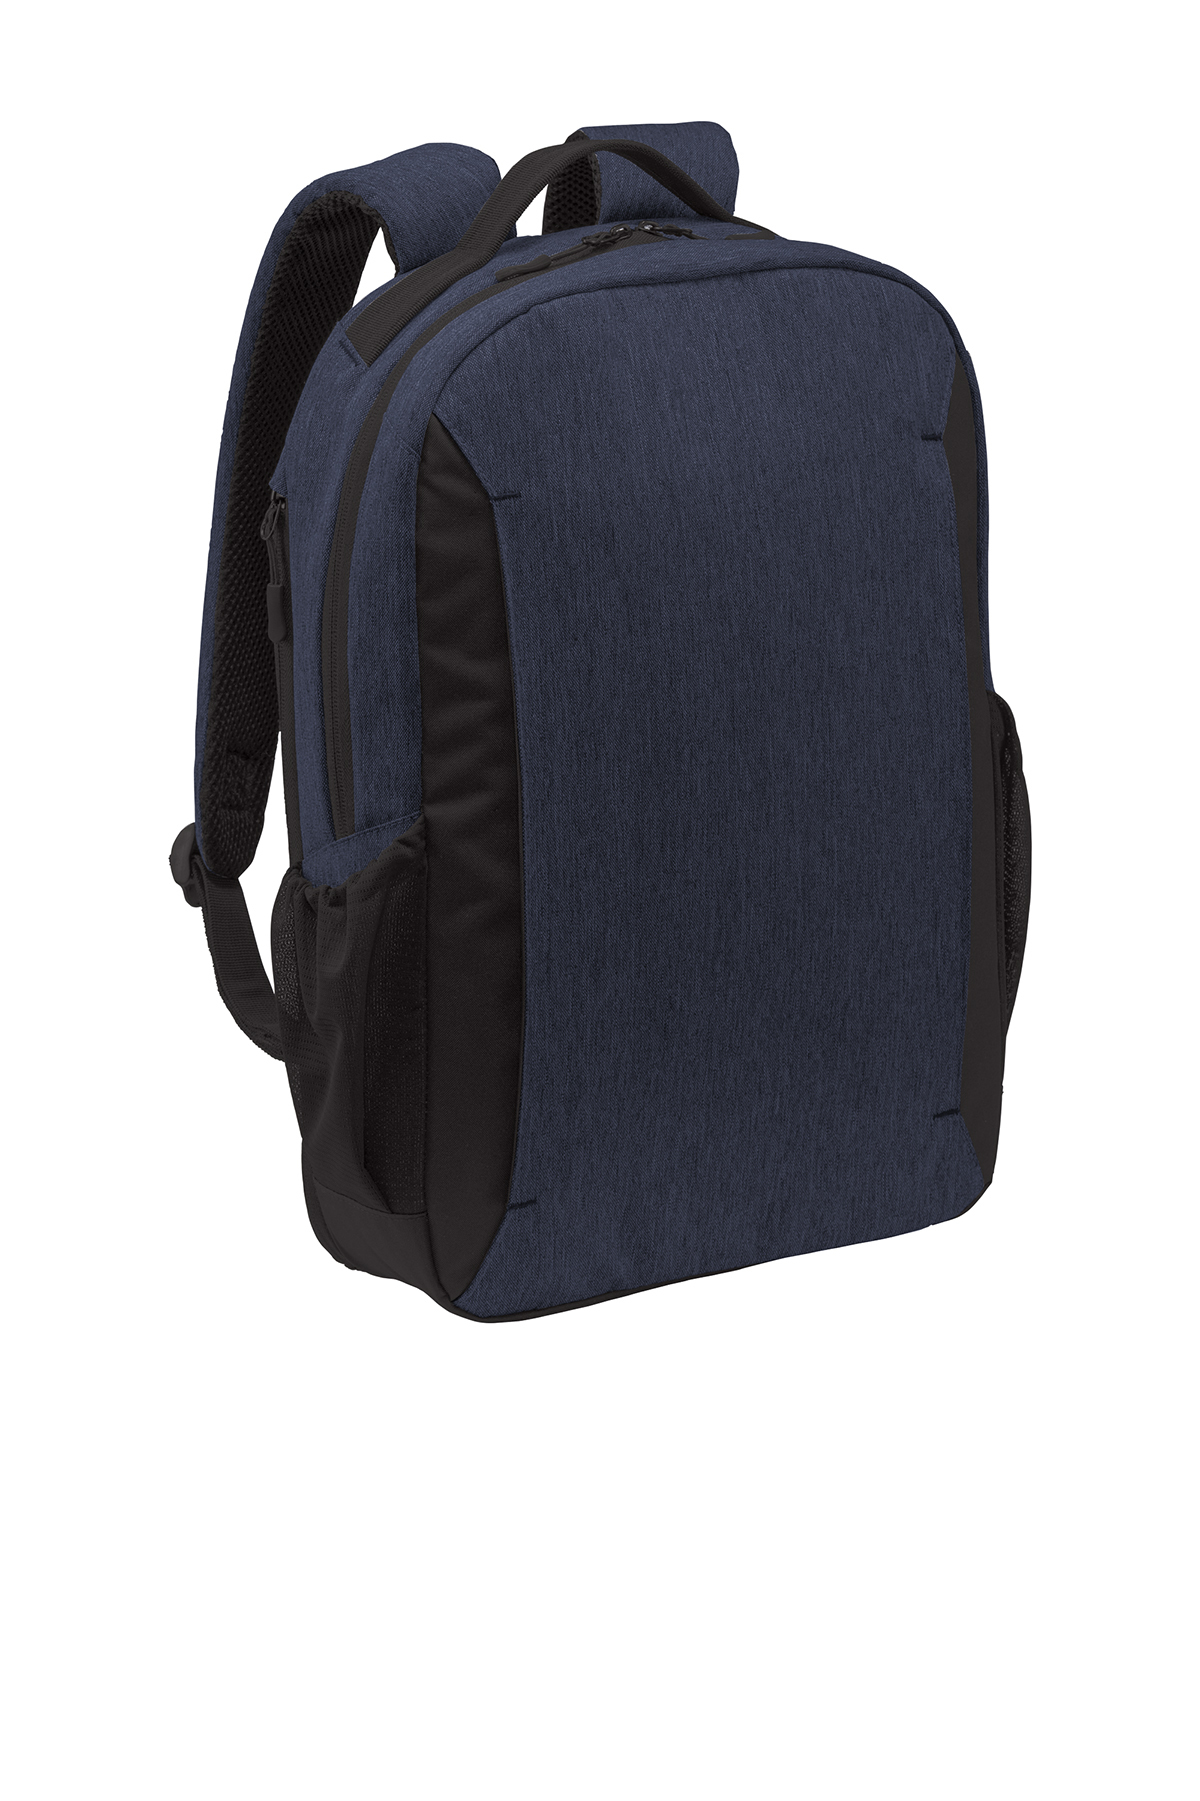 Neottec Backpack Tour navy